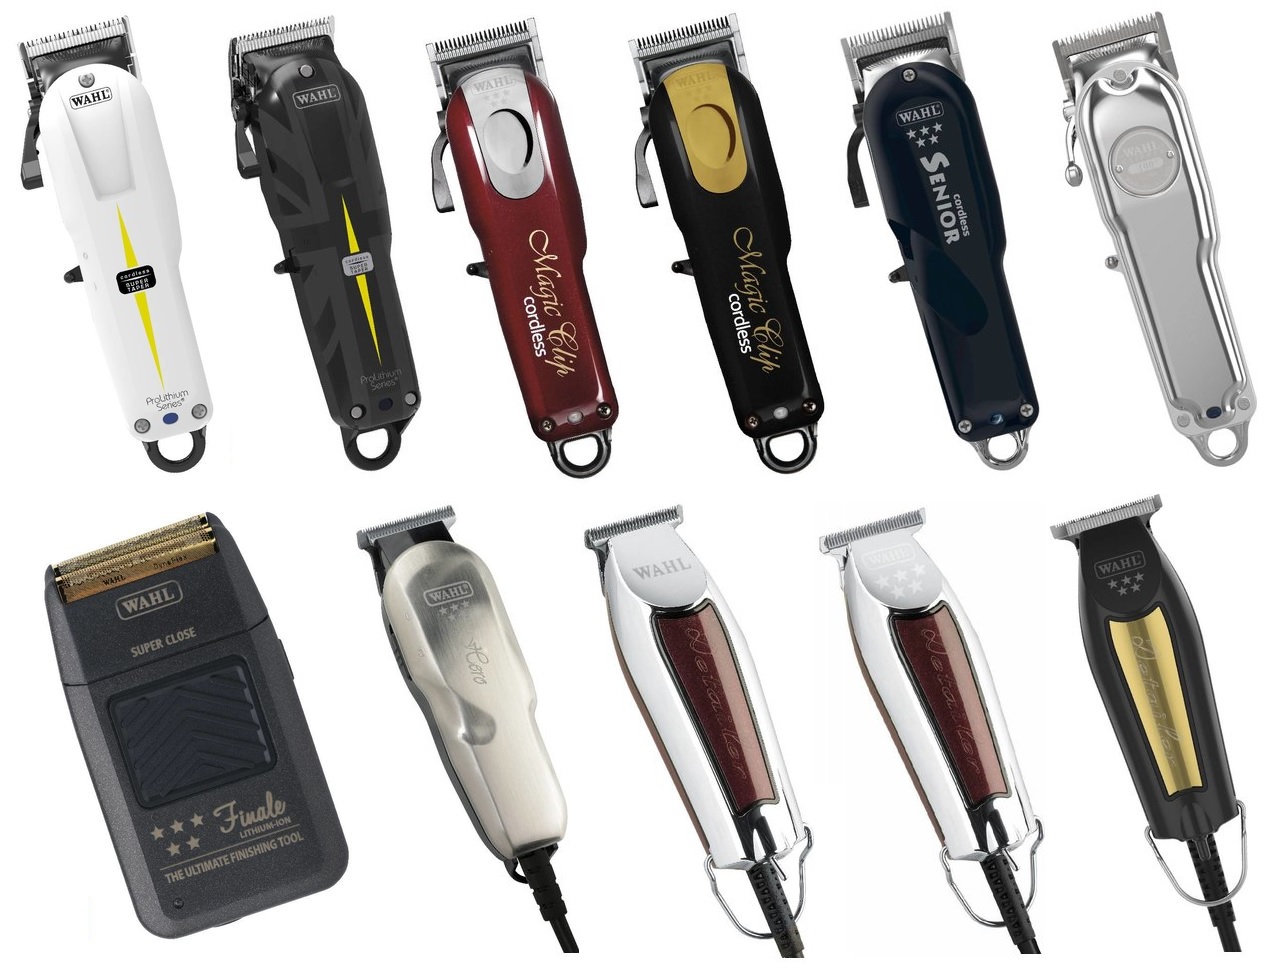 www wahl com clippers